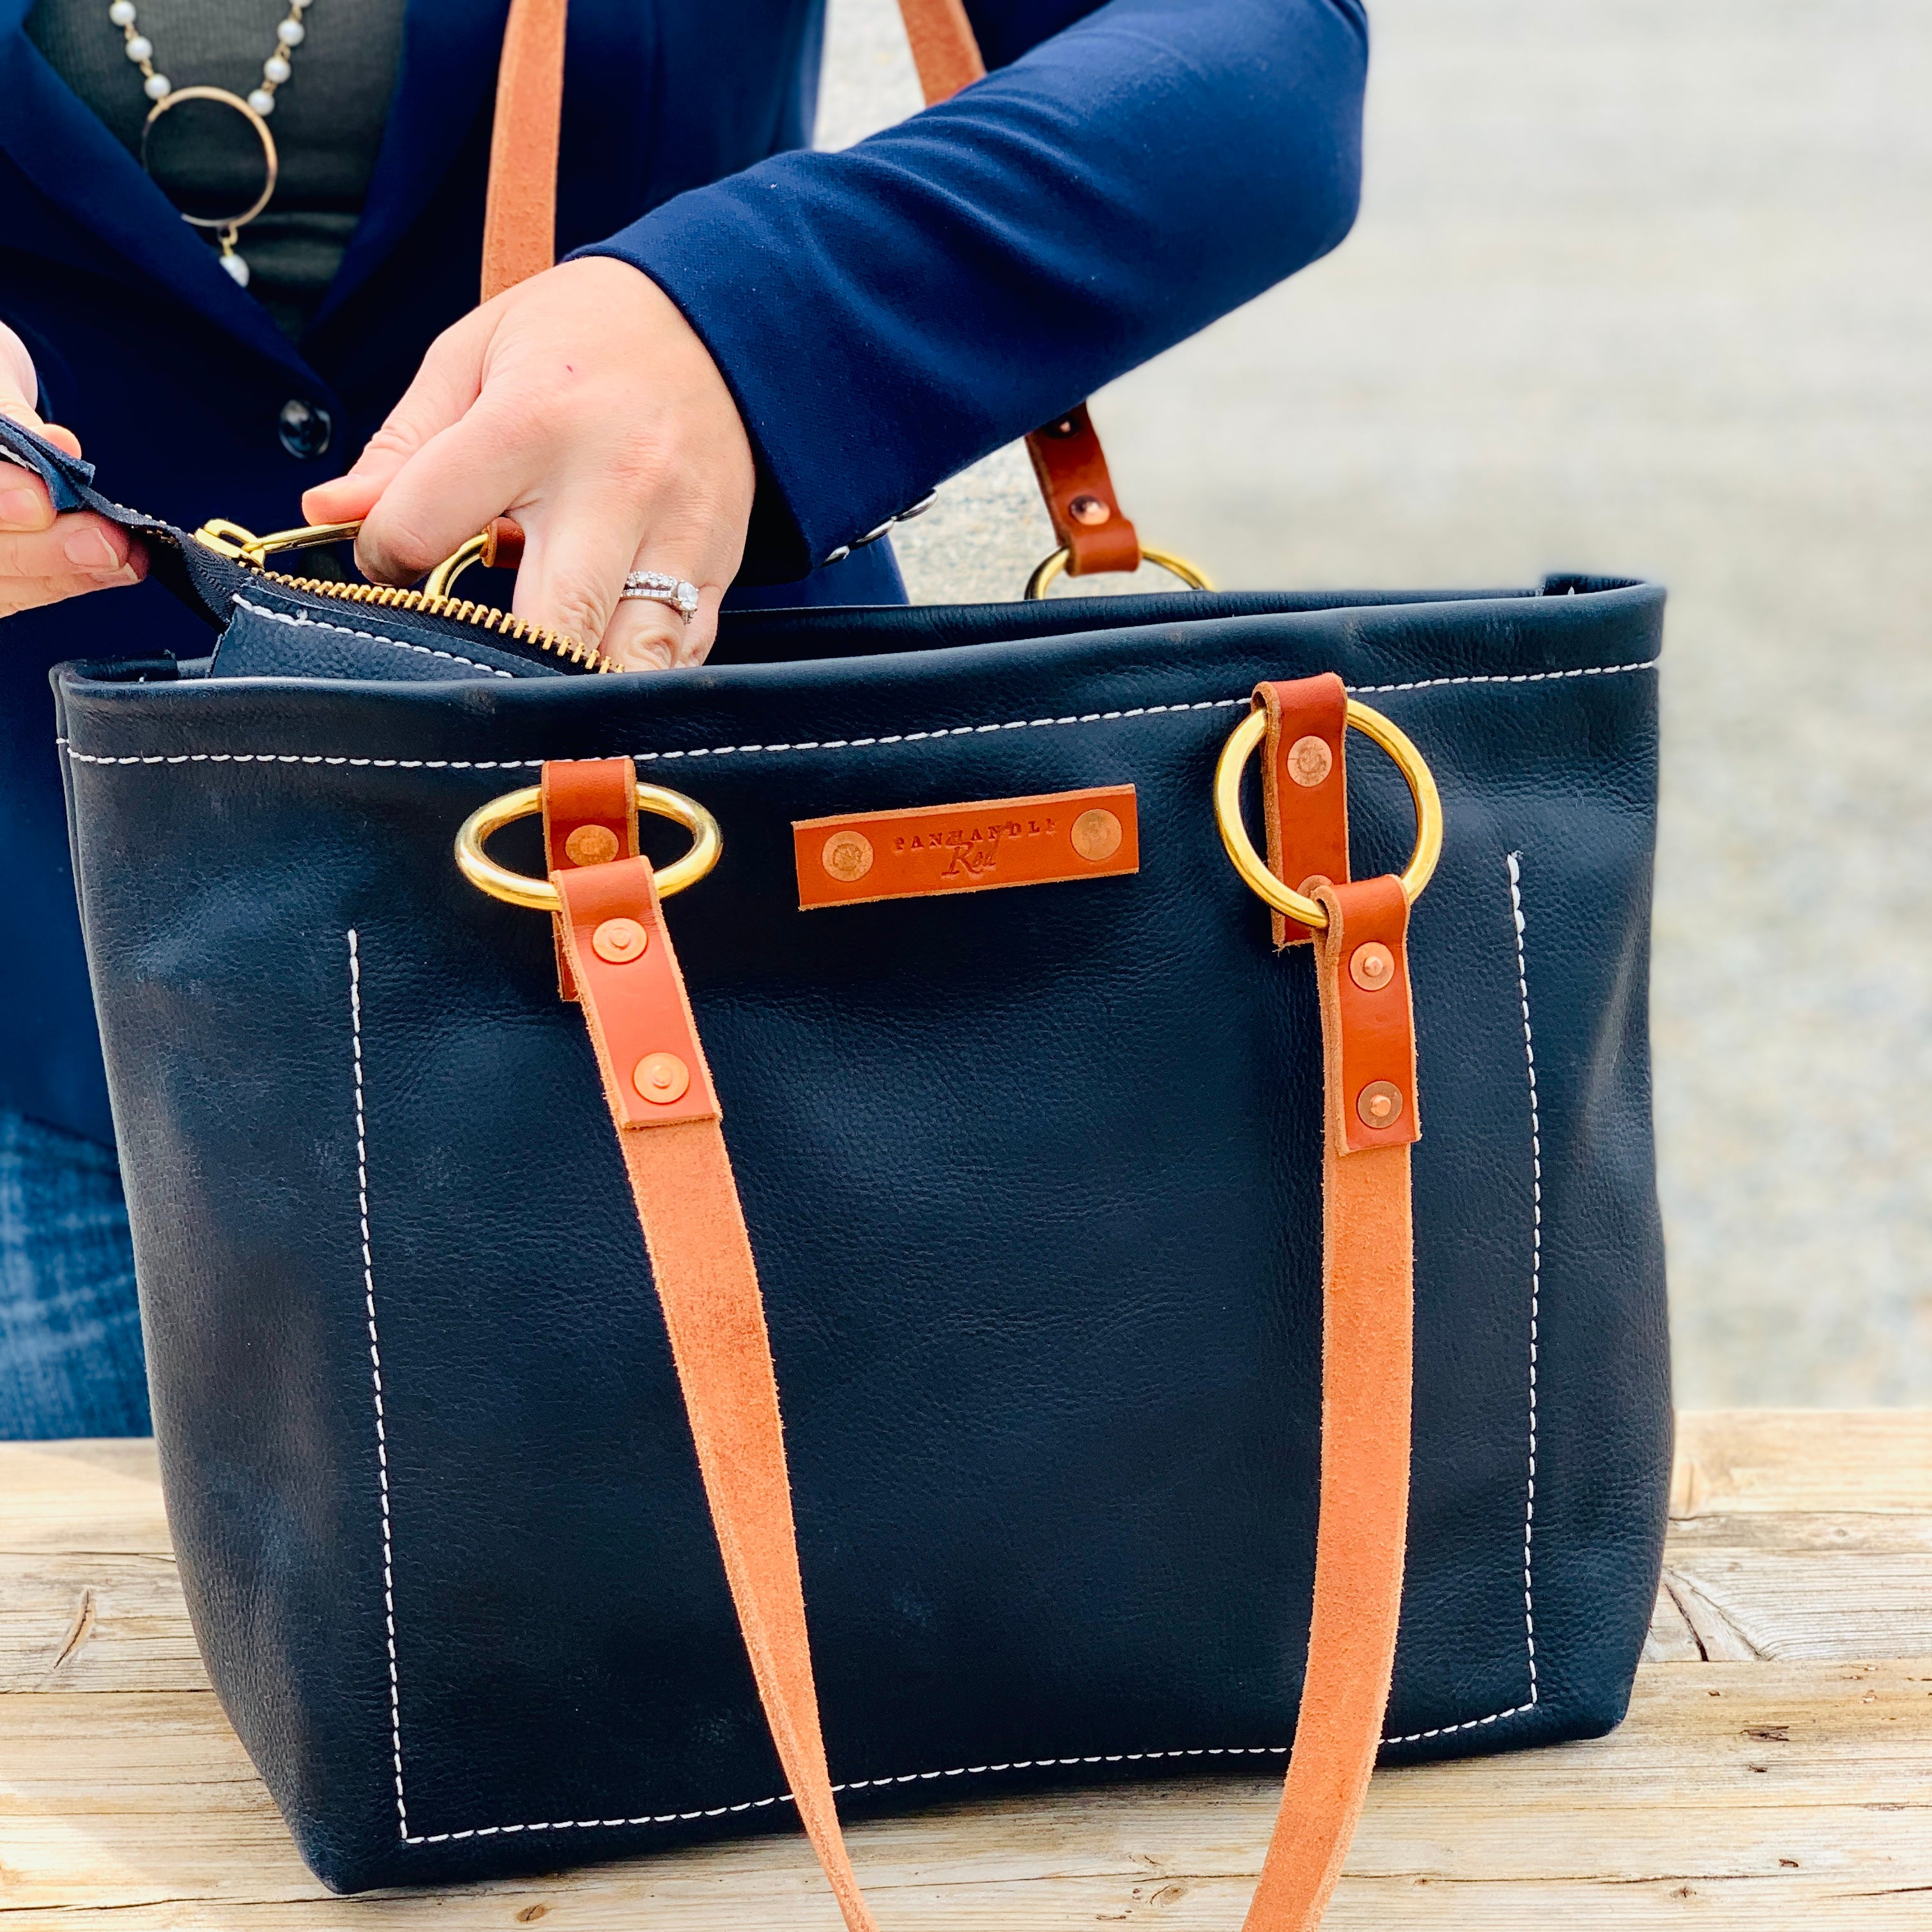 Bag Refashion Projects: 30 Ways to Update Bags & Purses